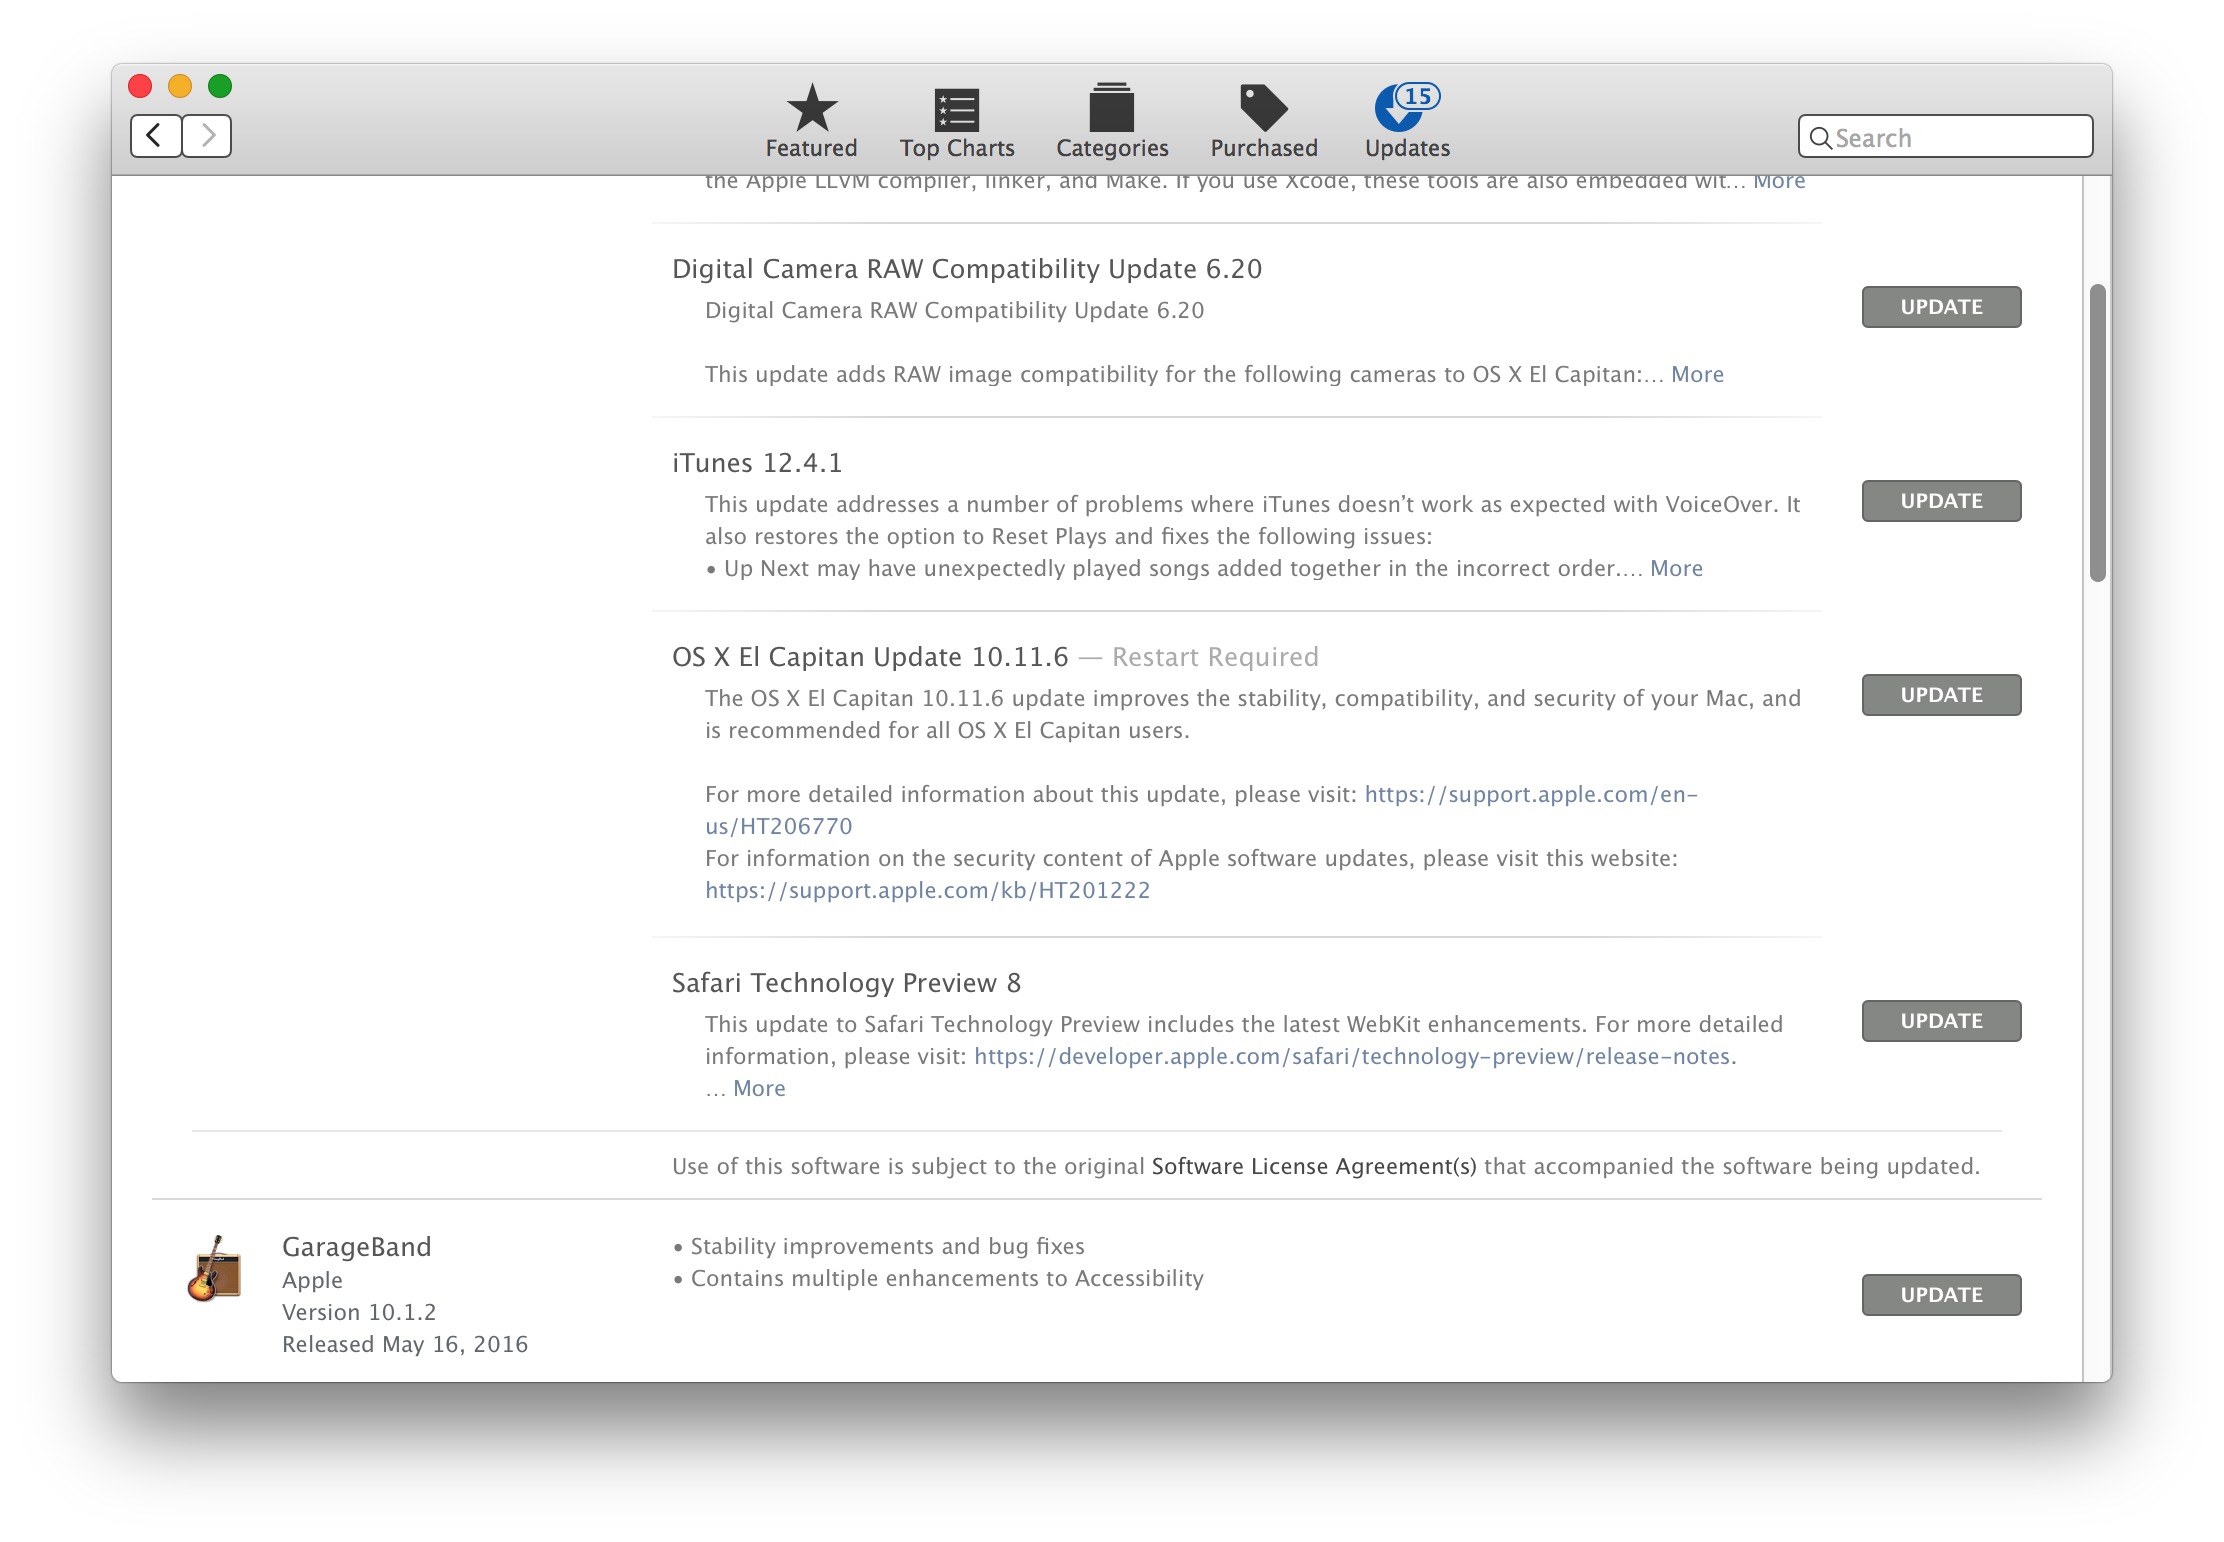 Which Xcode Works For Mac Os X 10.11.6